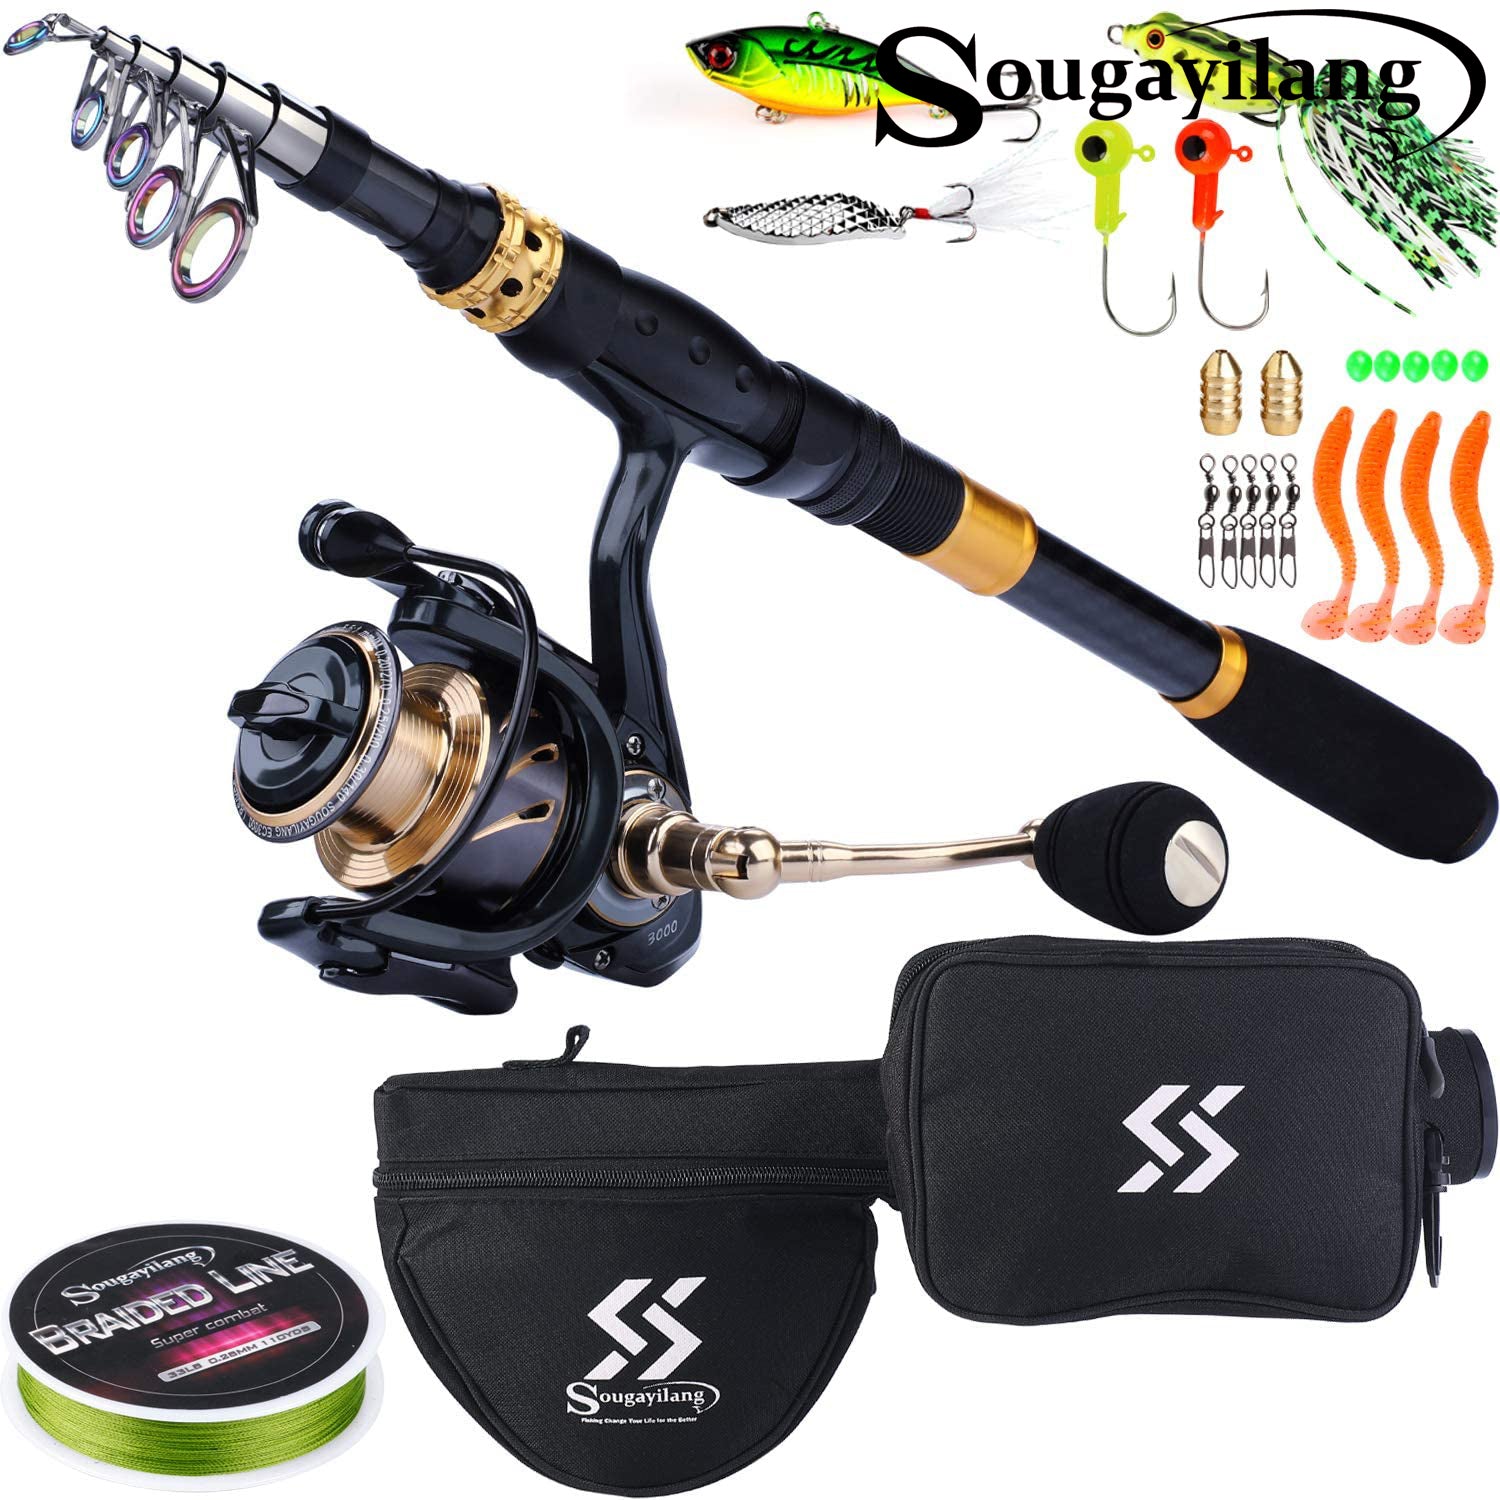 Sougayilang Spinning Telescopic Rod and Spinning Reel Fishing Combo for Travel, Size: 3.0m and 3000